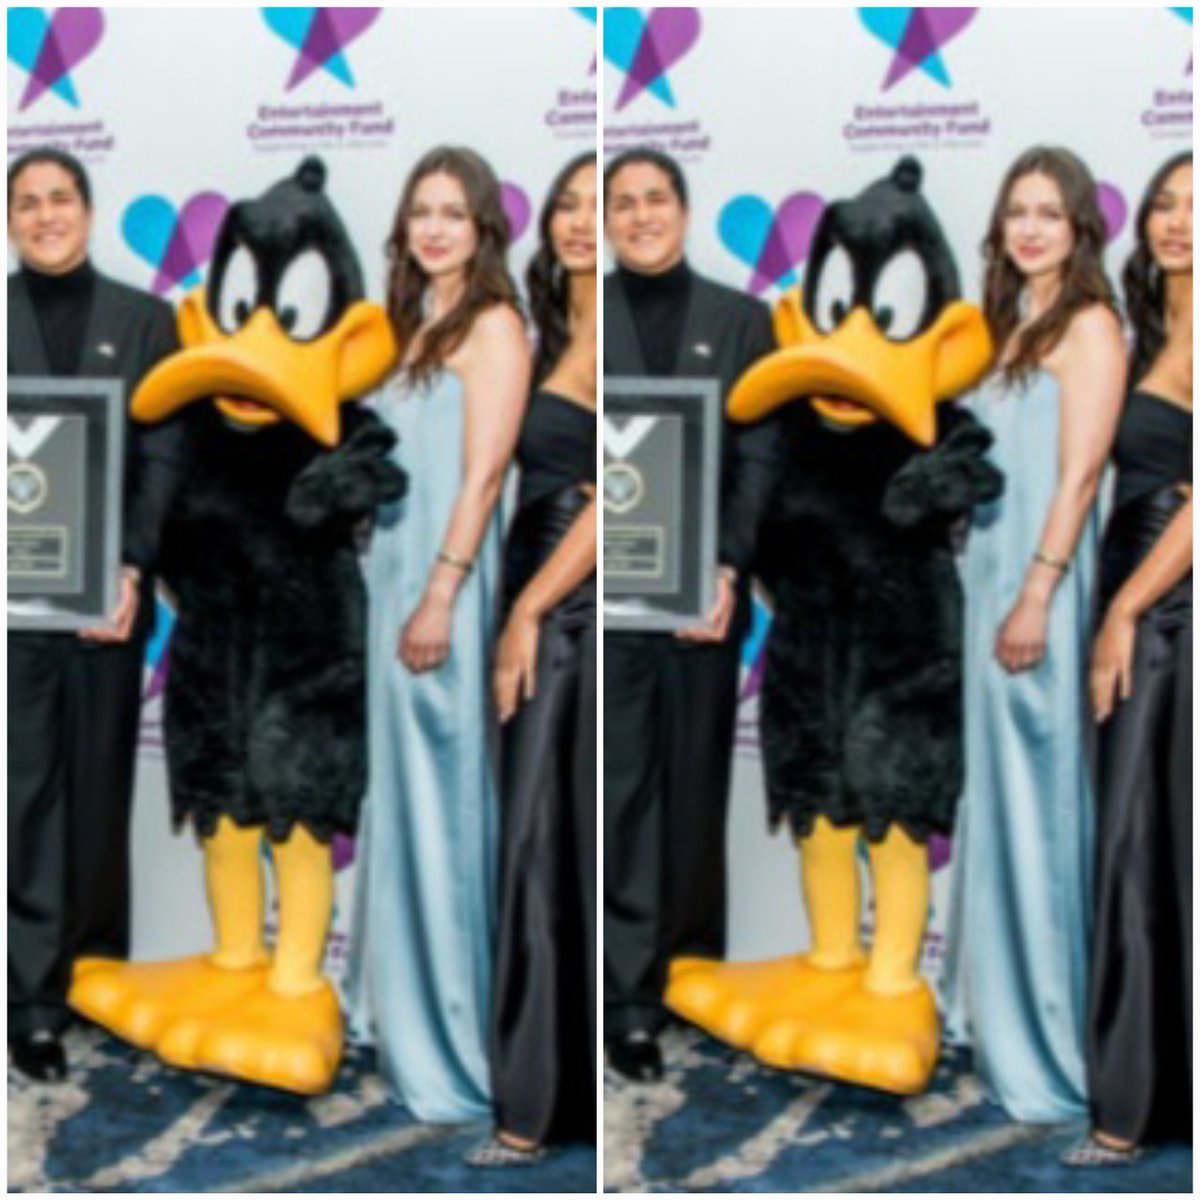 W/ daffy duck lol blurry but we're used to it 😂

#melissabenoist